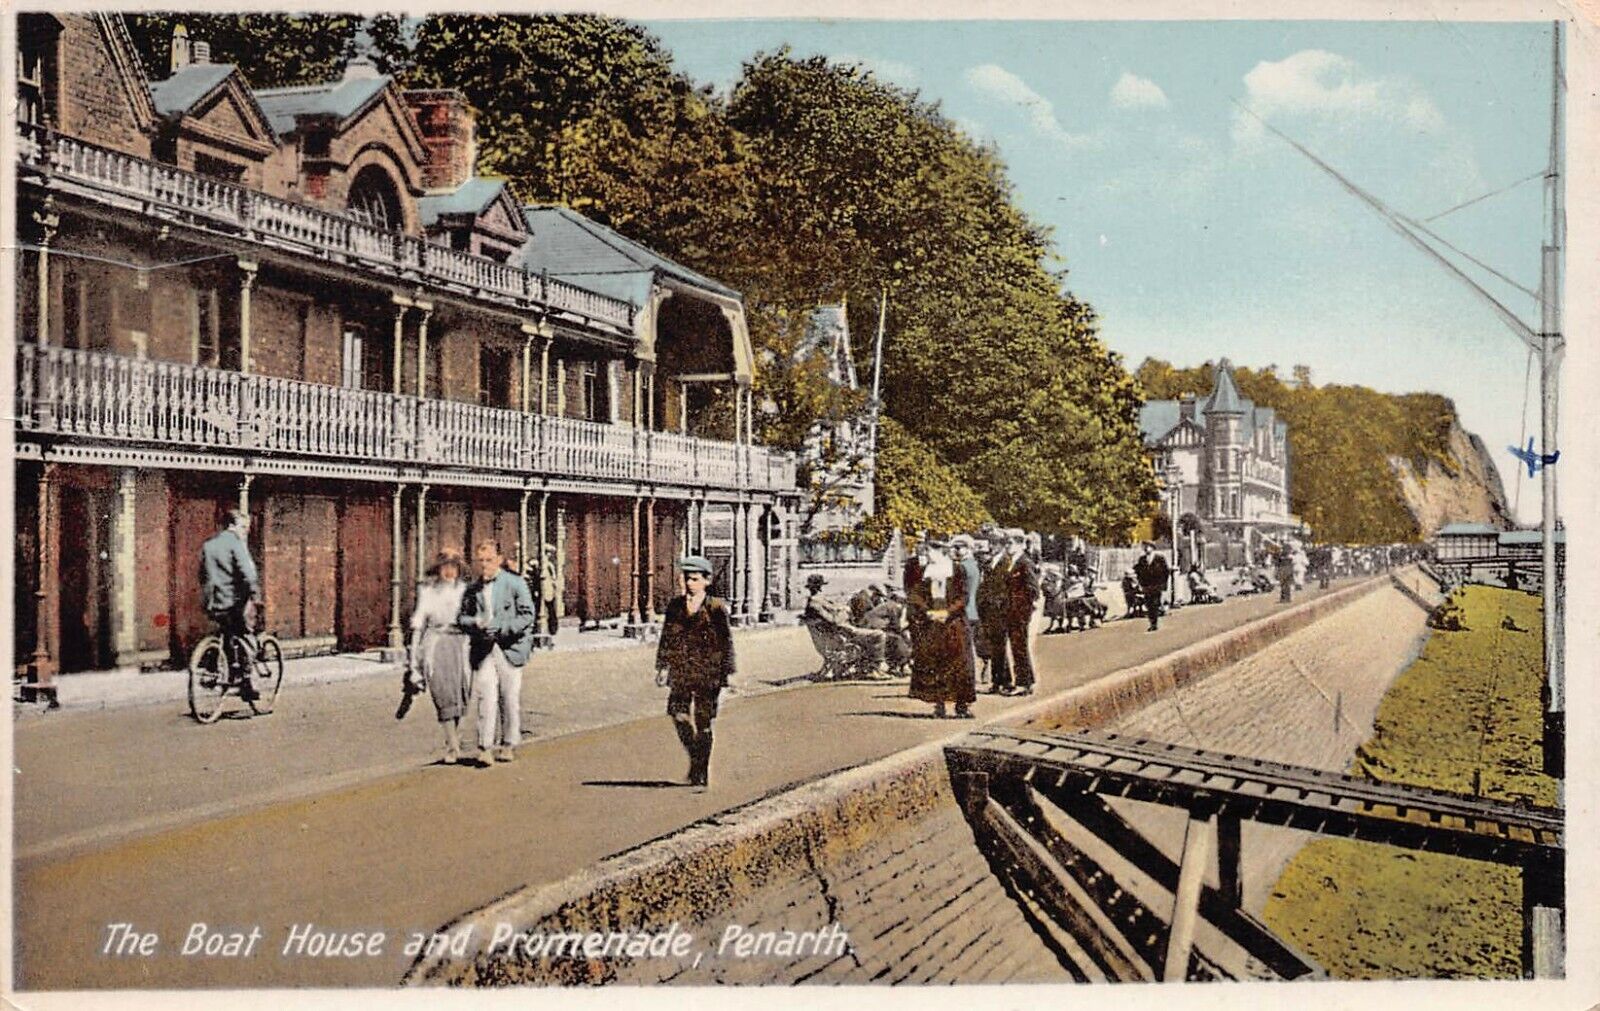 The Boat House and Promenade, Penarth, Wales, Great Britain, Early Postcard